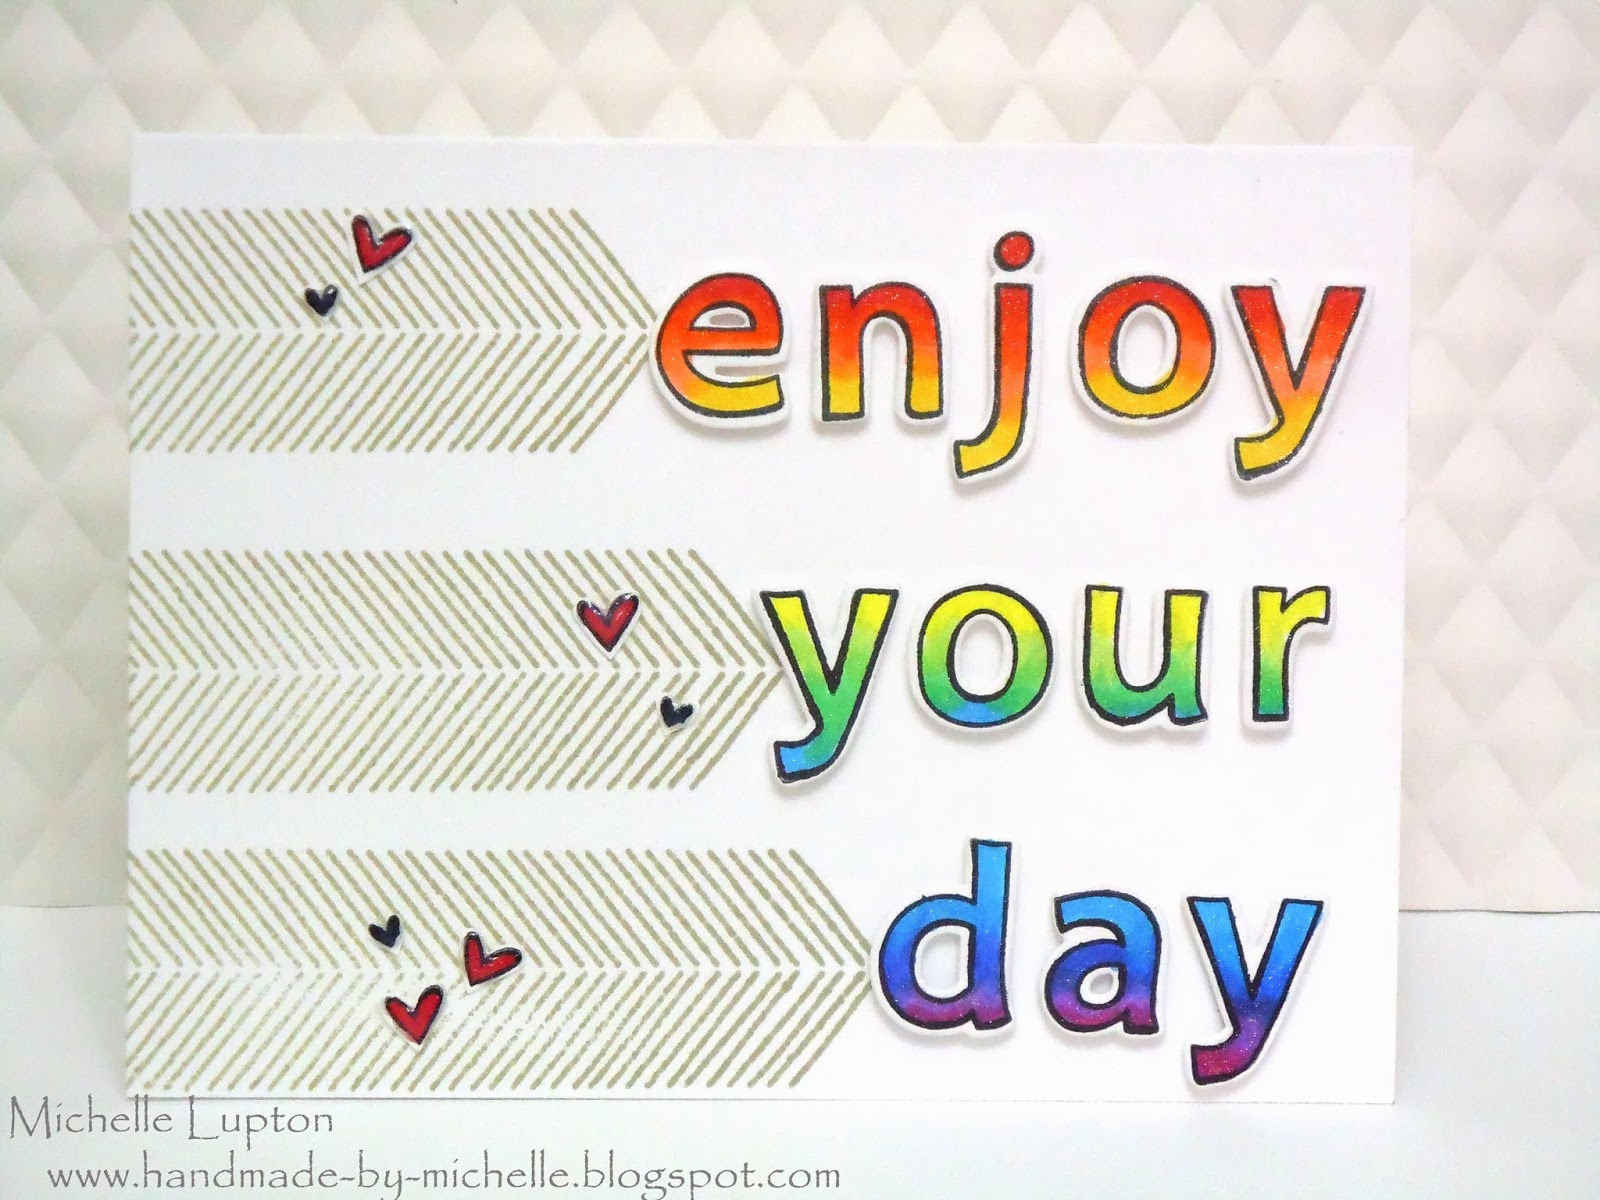 Handmade by Michelle: Enjoy your day